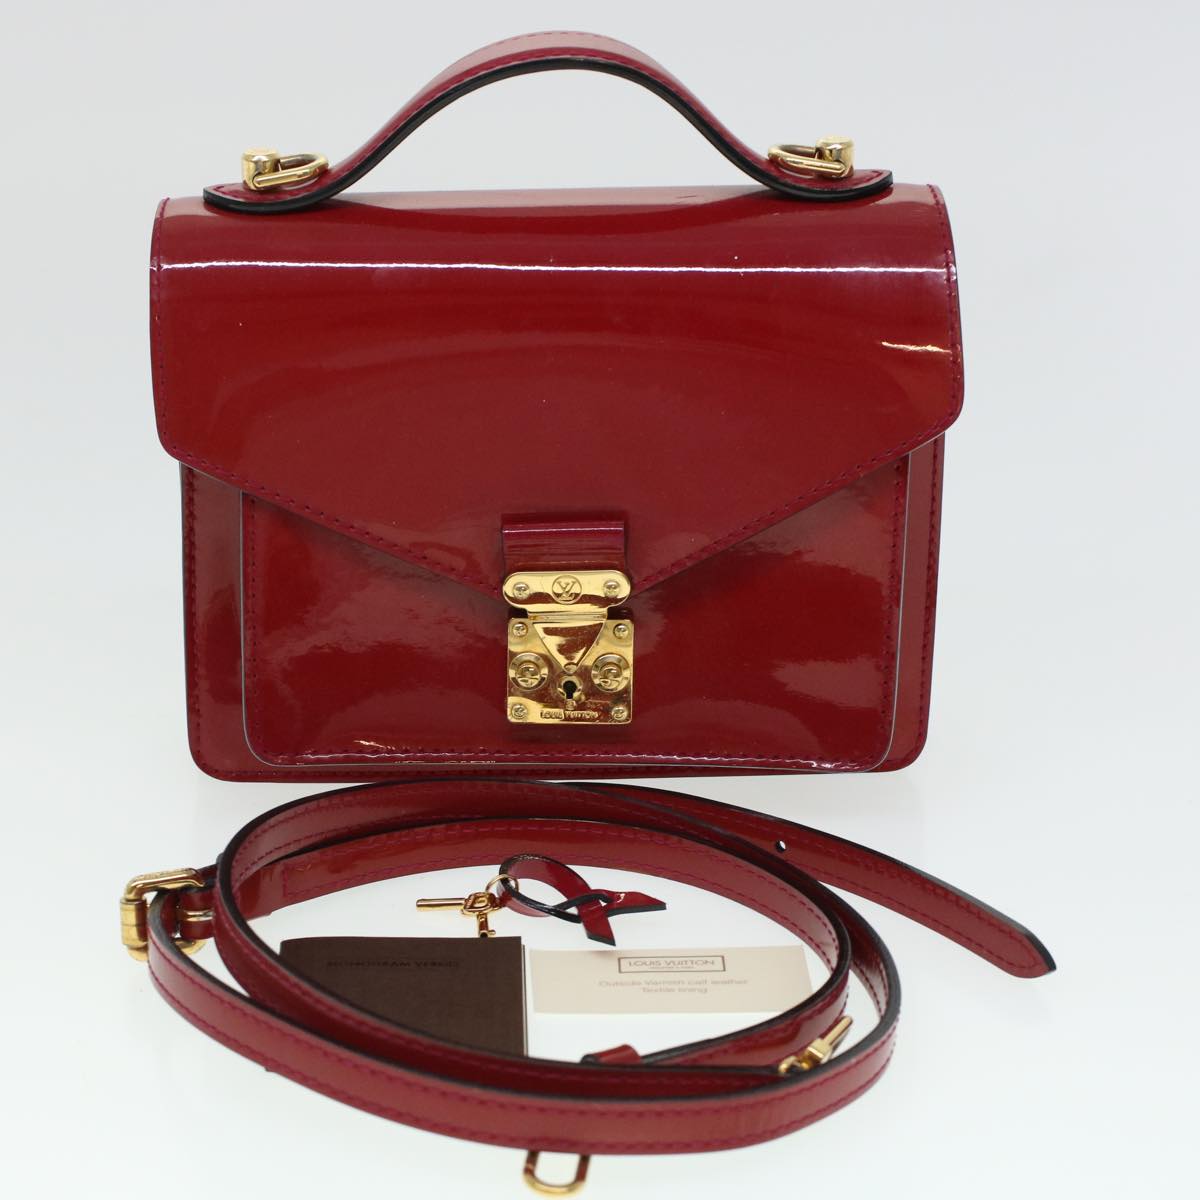 LOUIS VUITTON Vernis Monceau BB Hand Bag 2way Red M91579 LV Auth bs5940